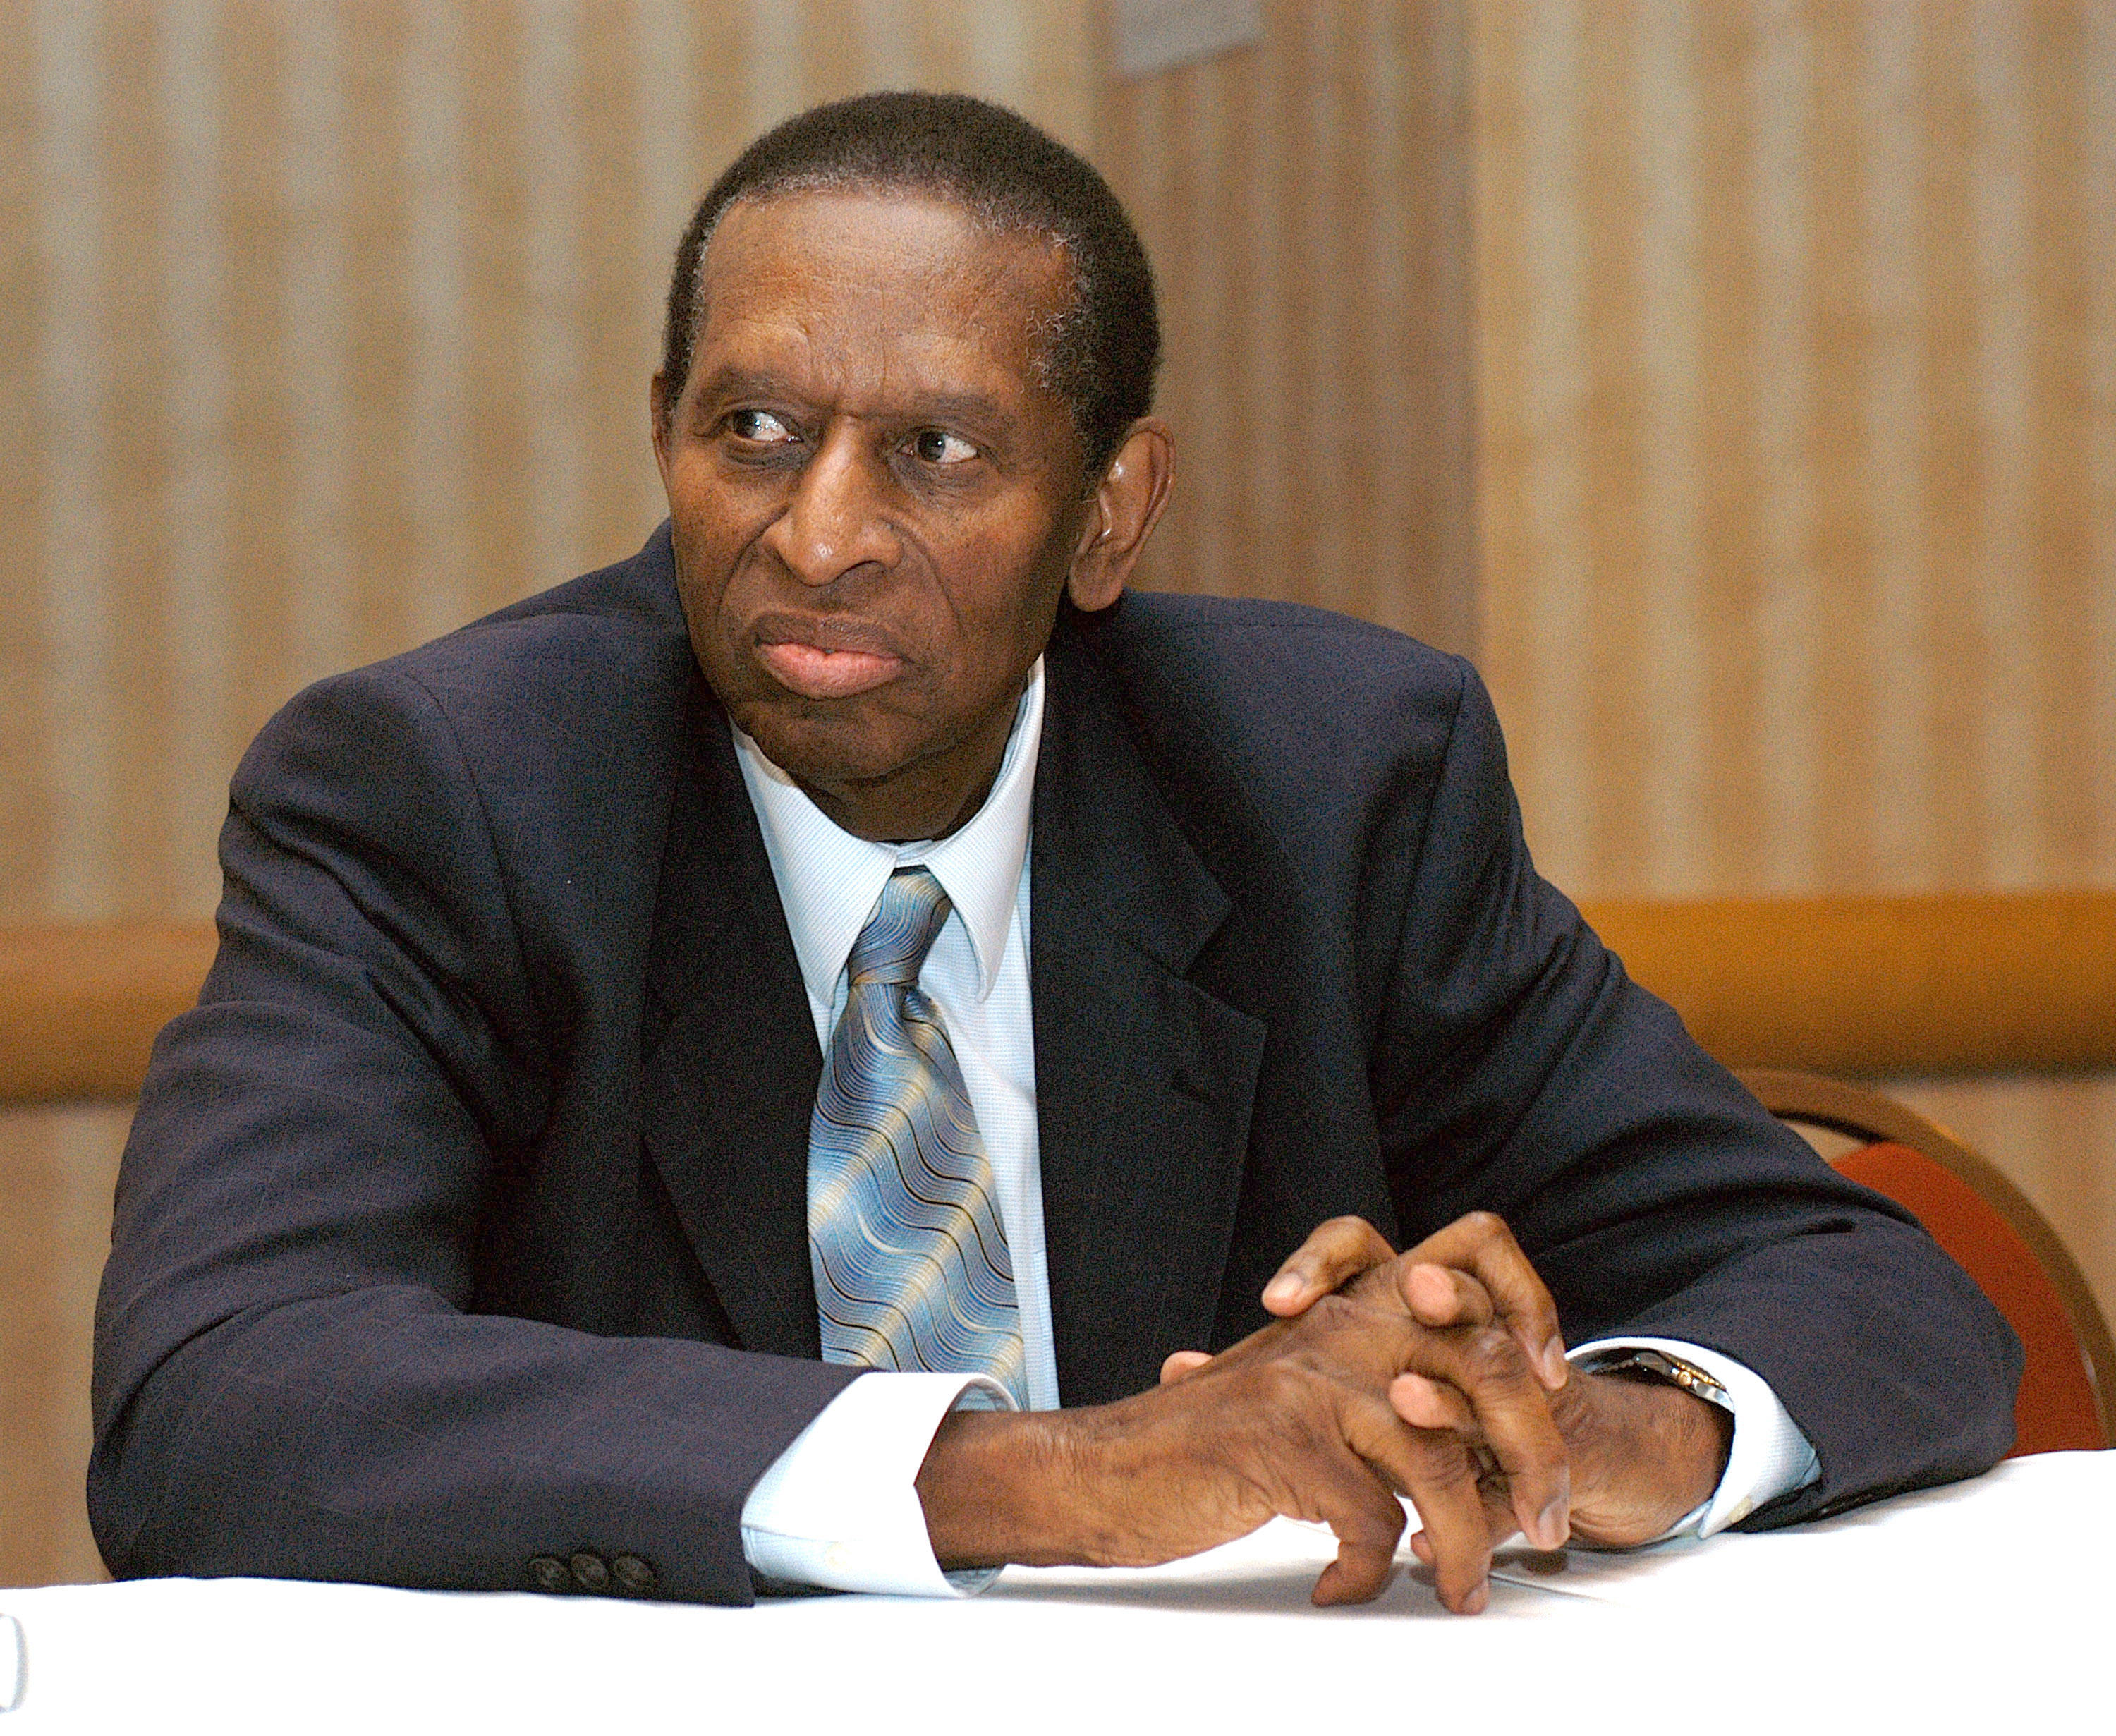 Earl Lloyd First African American To Play In The Nba Dead At 86 Global Grind